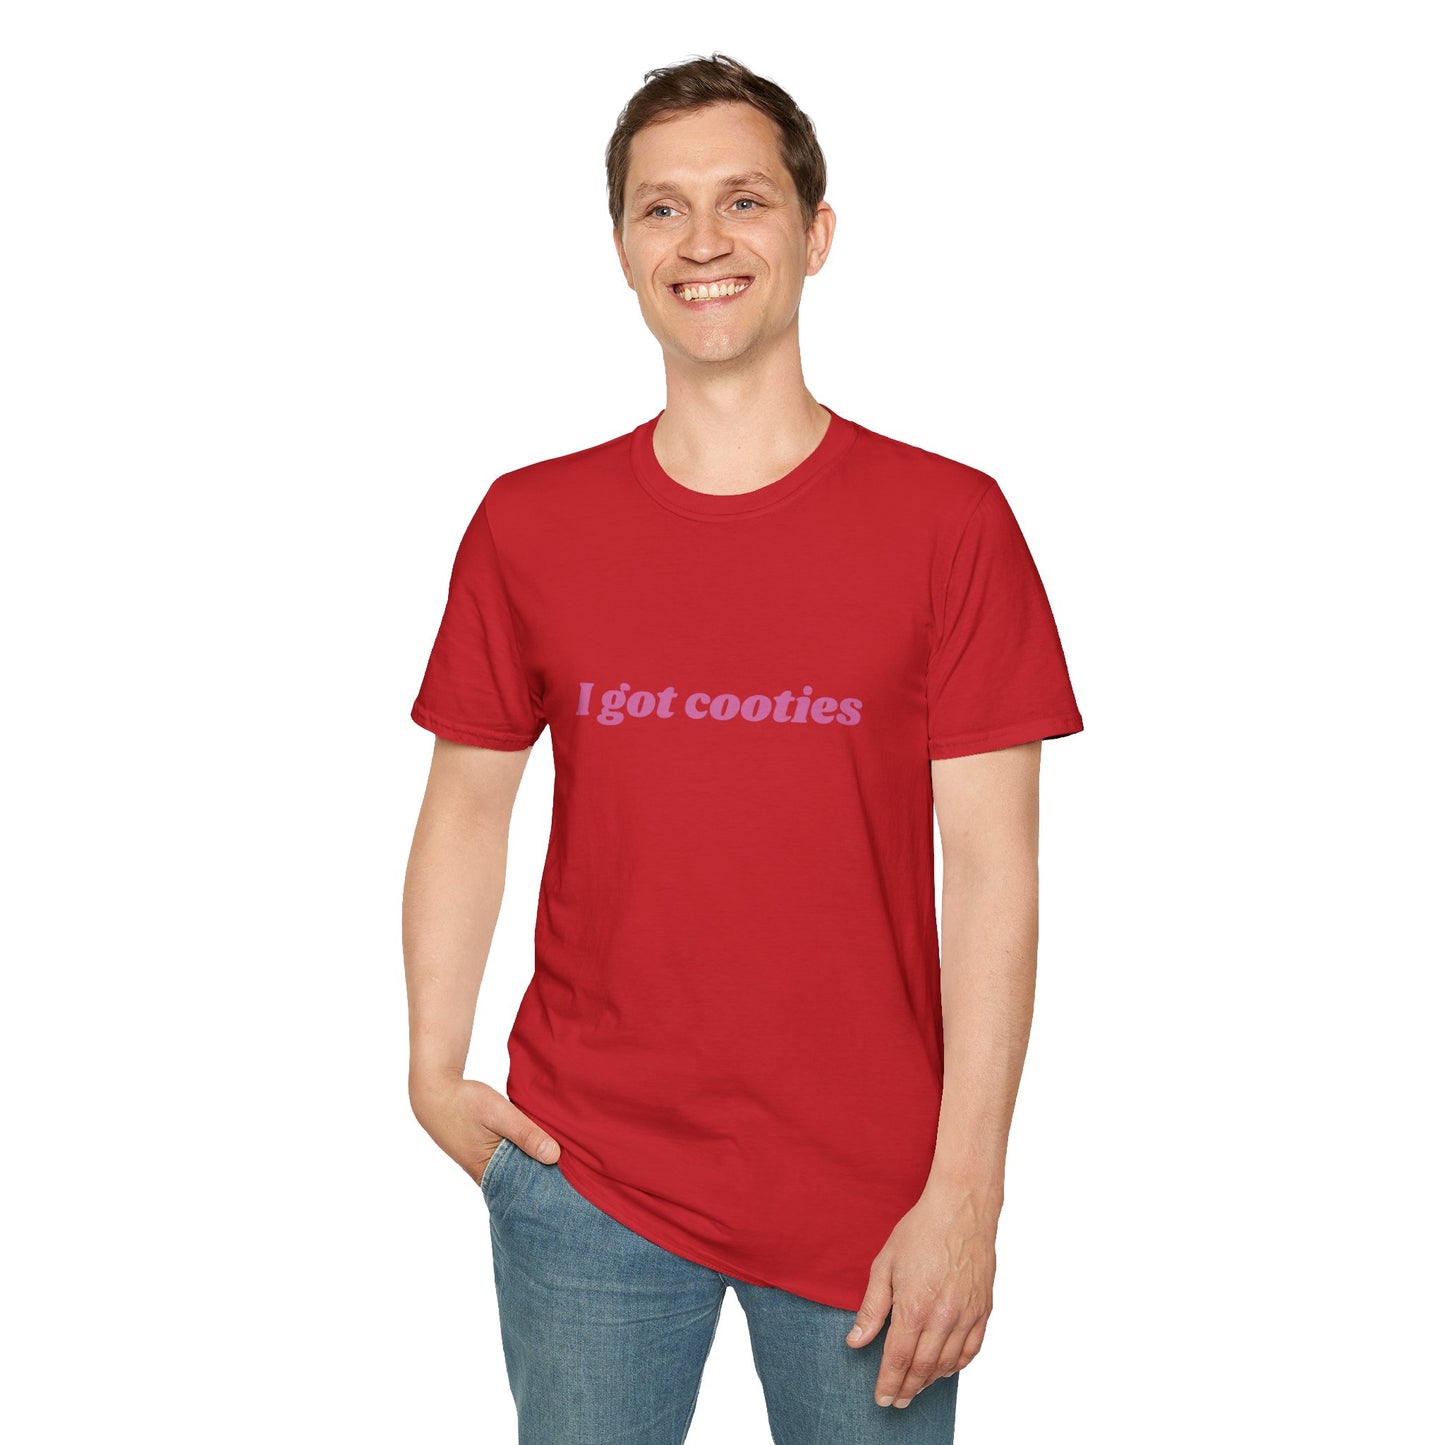 I got cooties - retro Softstyle T-Shirt